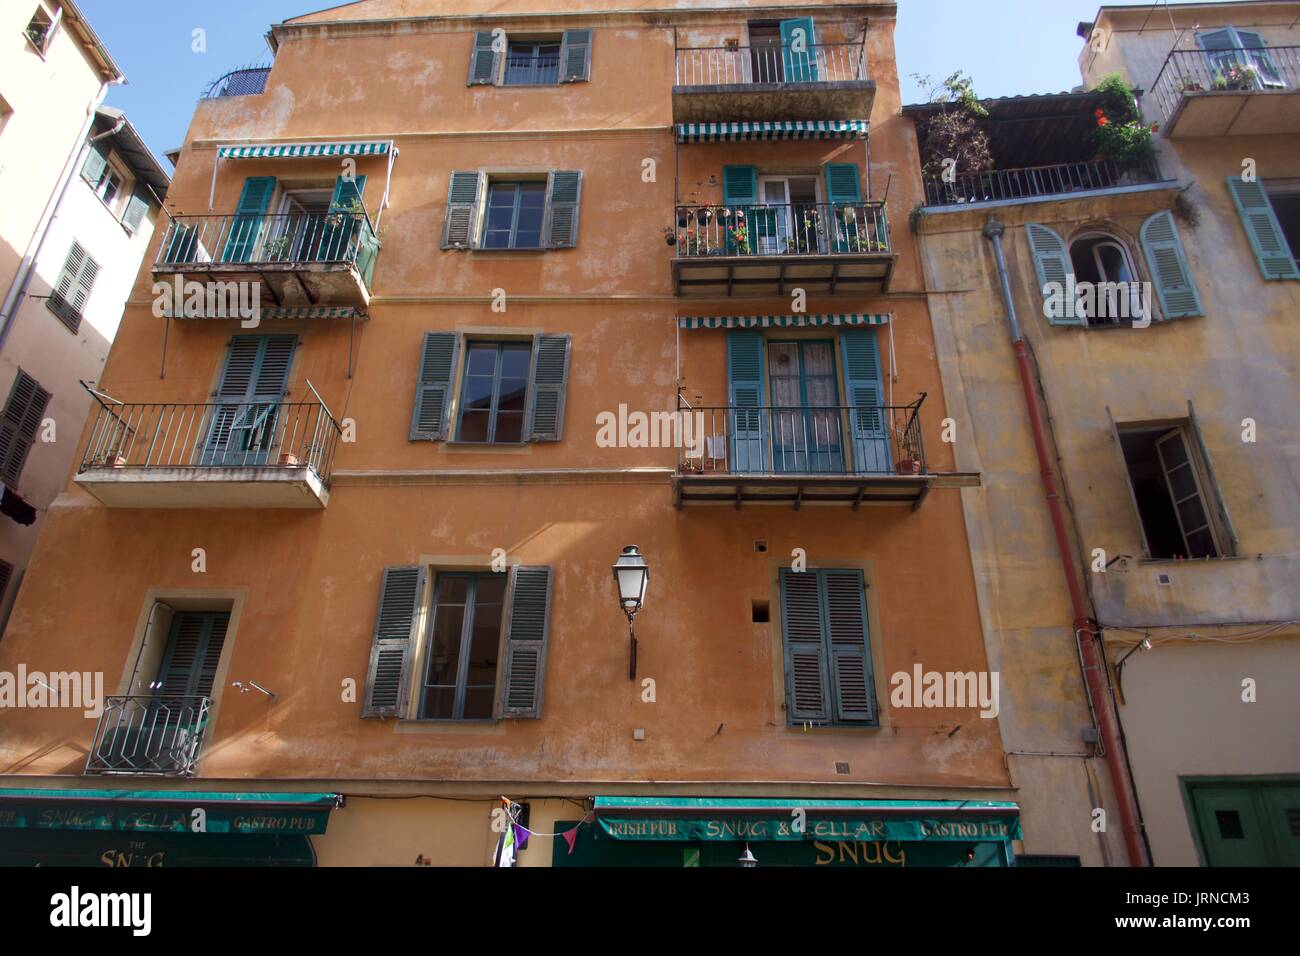 Old town apartment exterior with window shutters and balconies, Nice, France Stock Photo